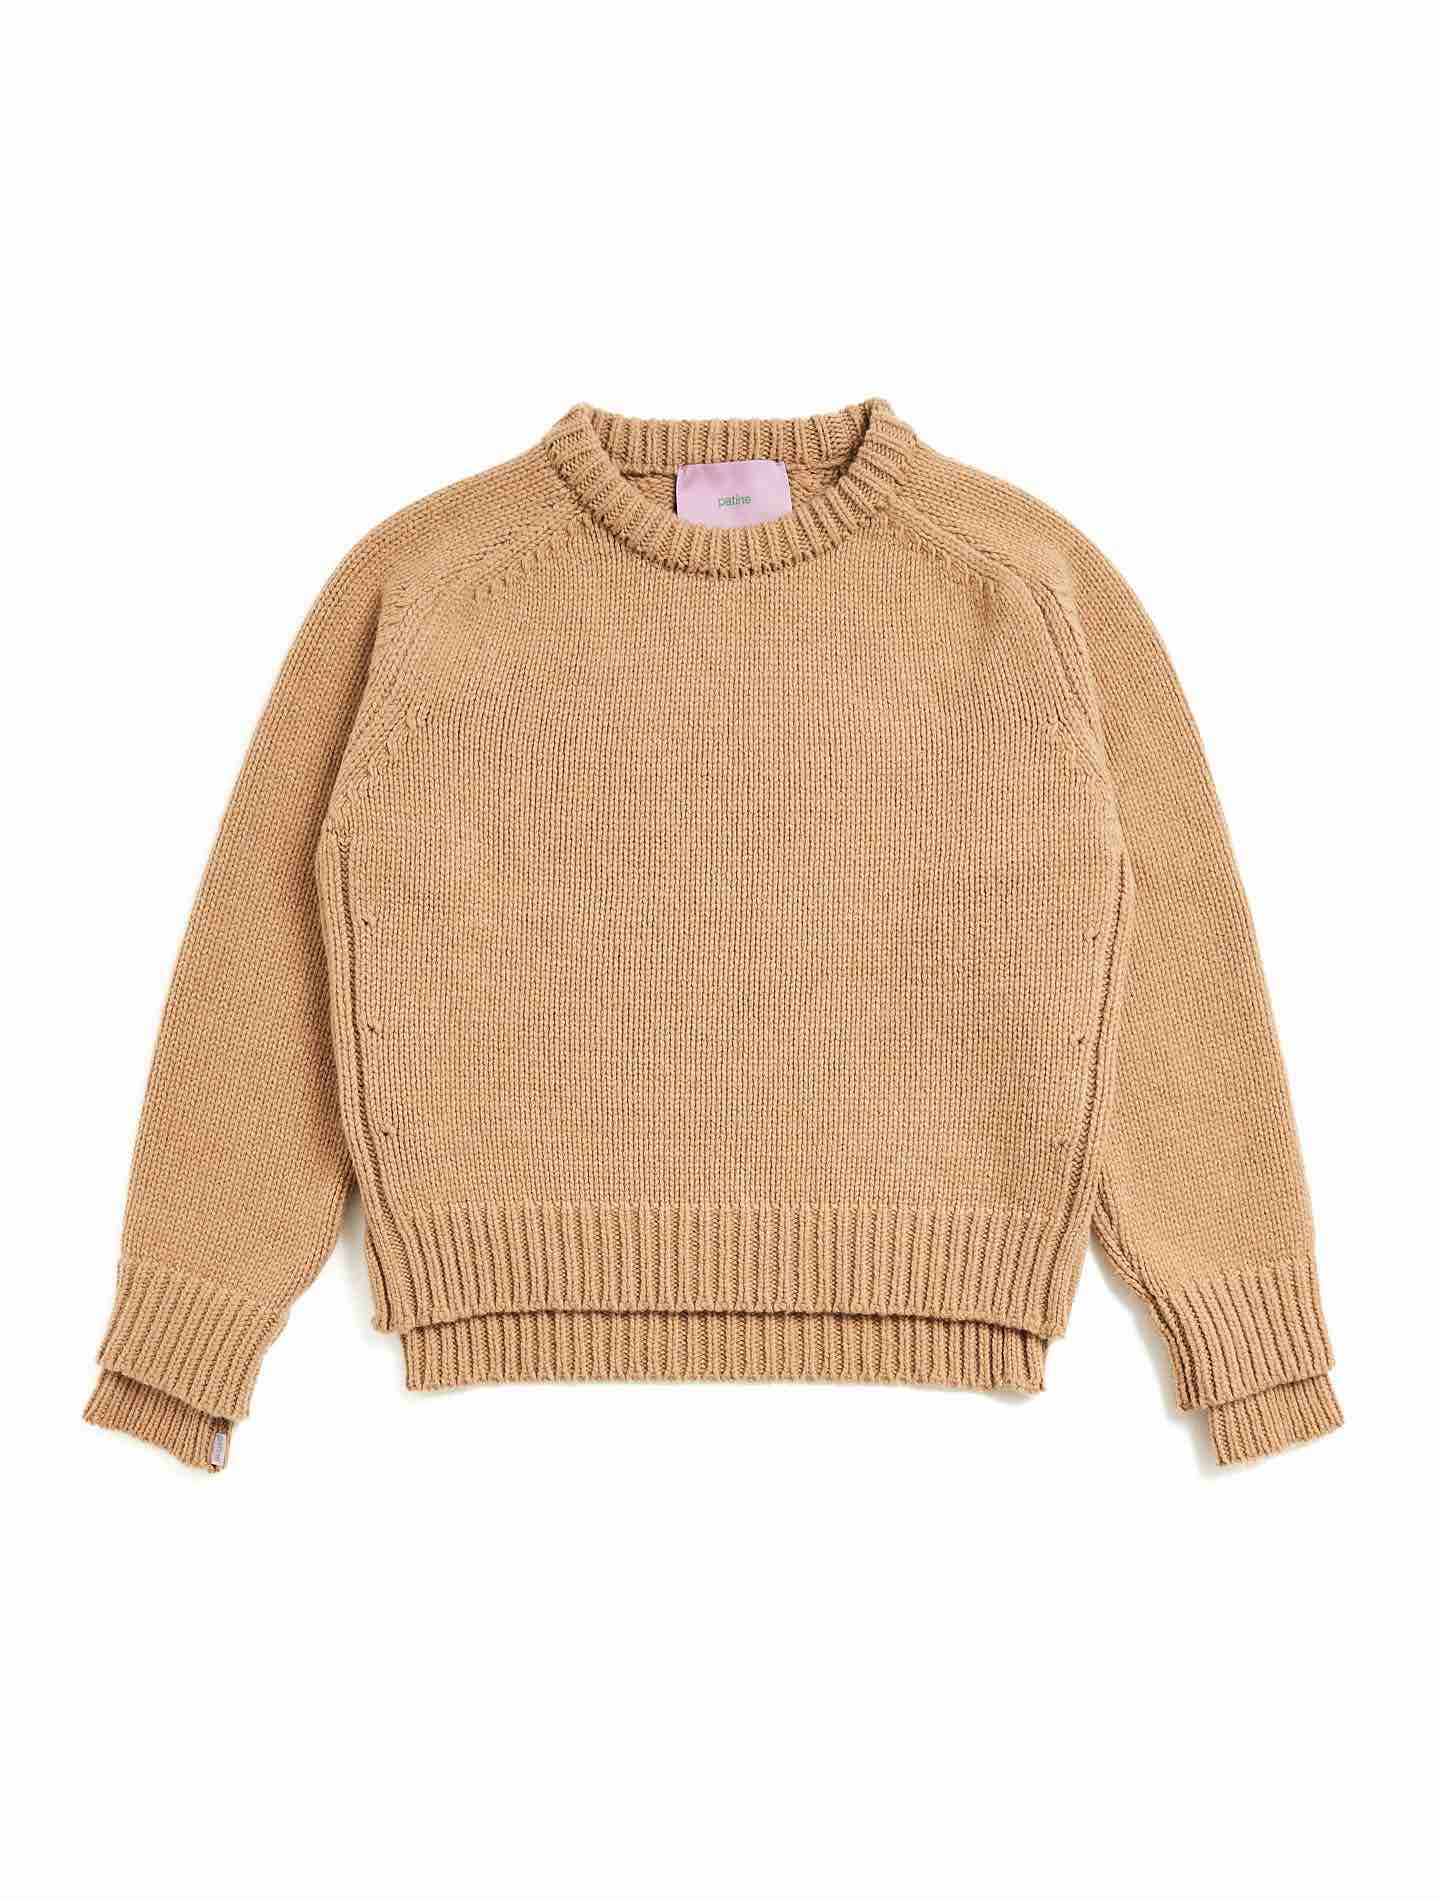 Le pull Wooly laine 100% recyclée Beige toast